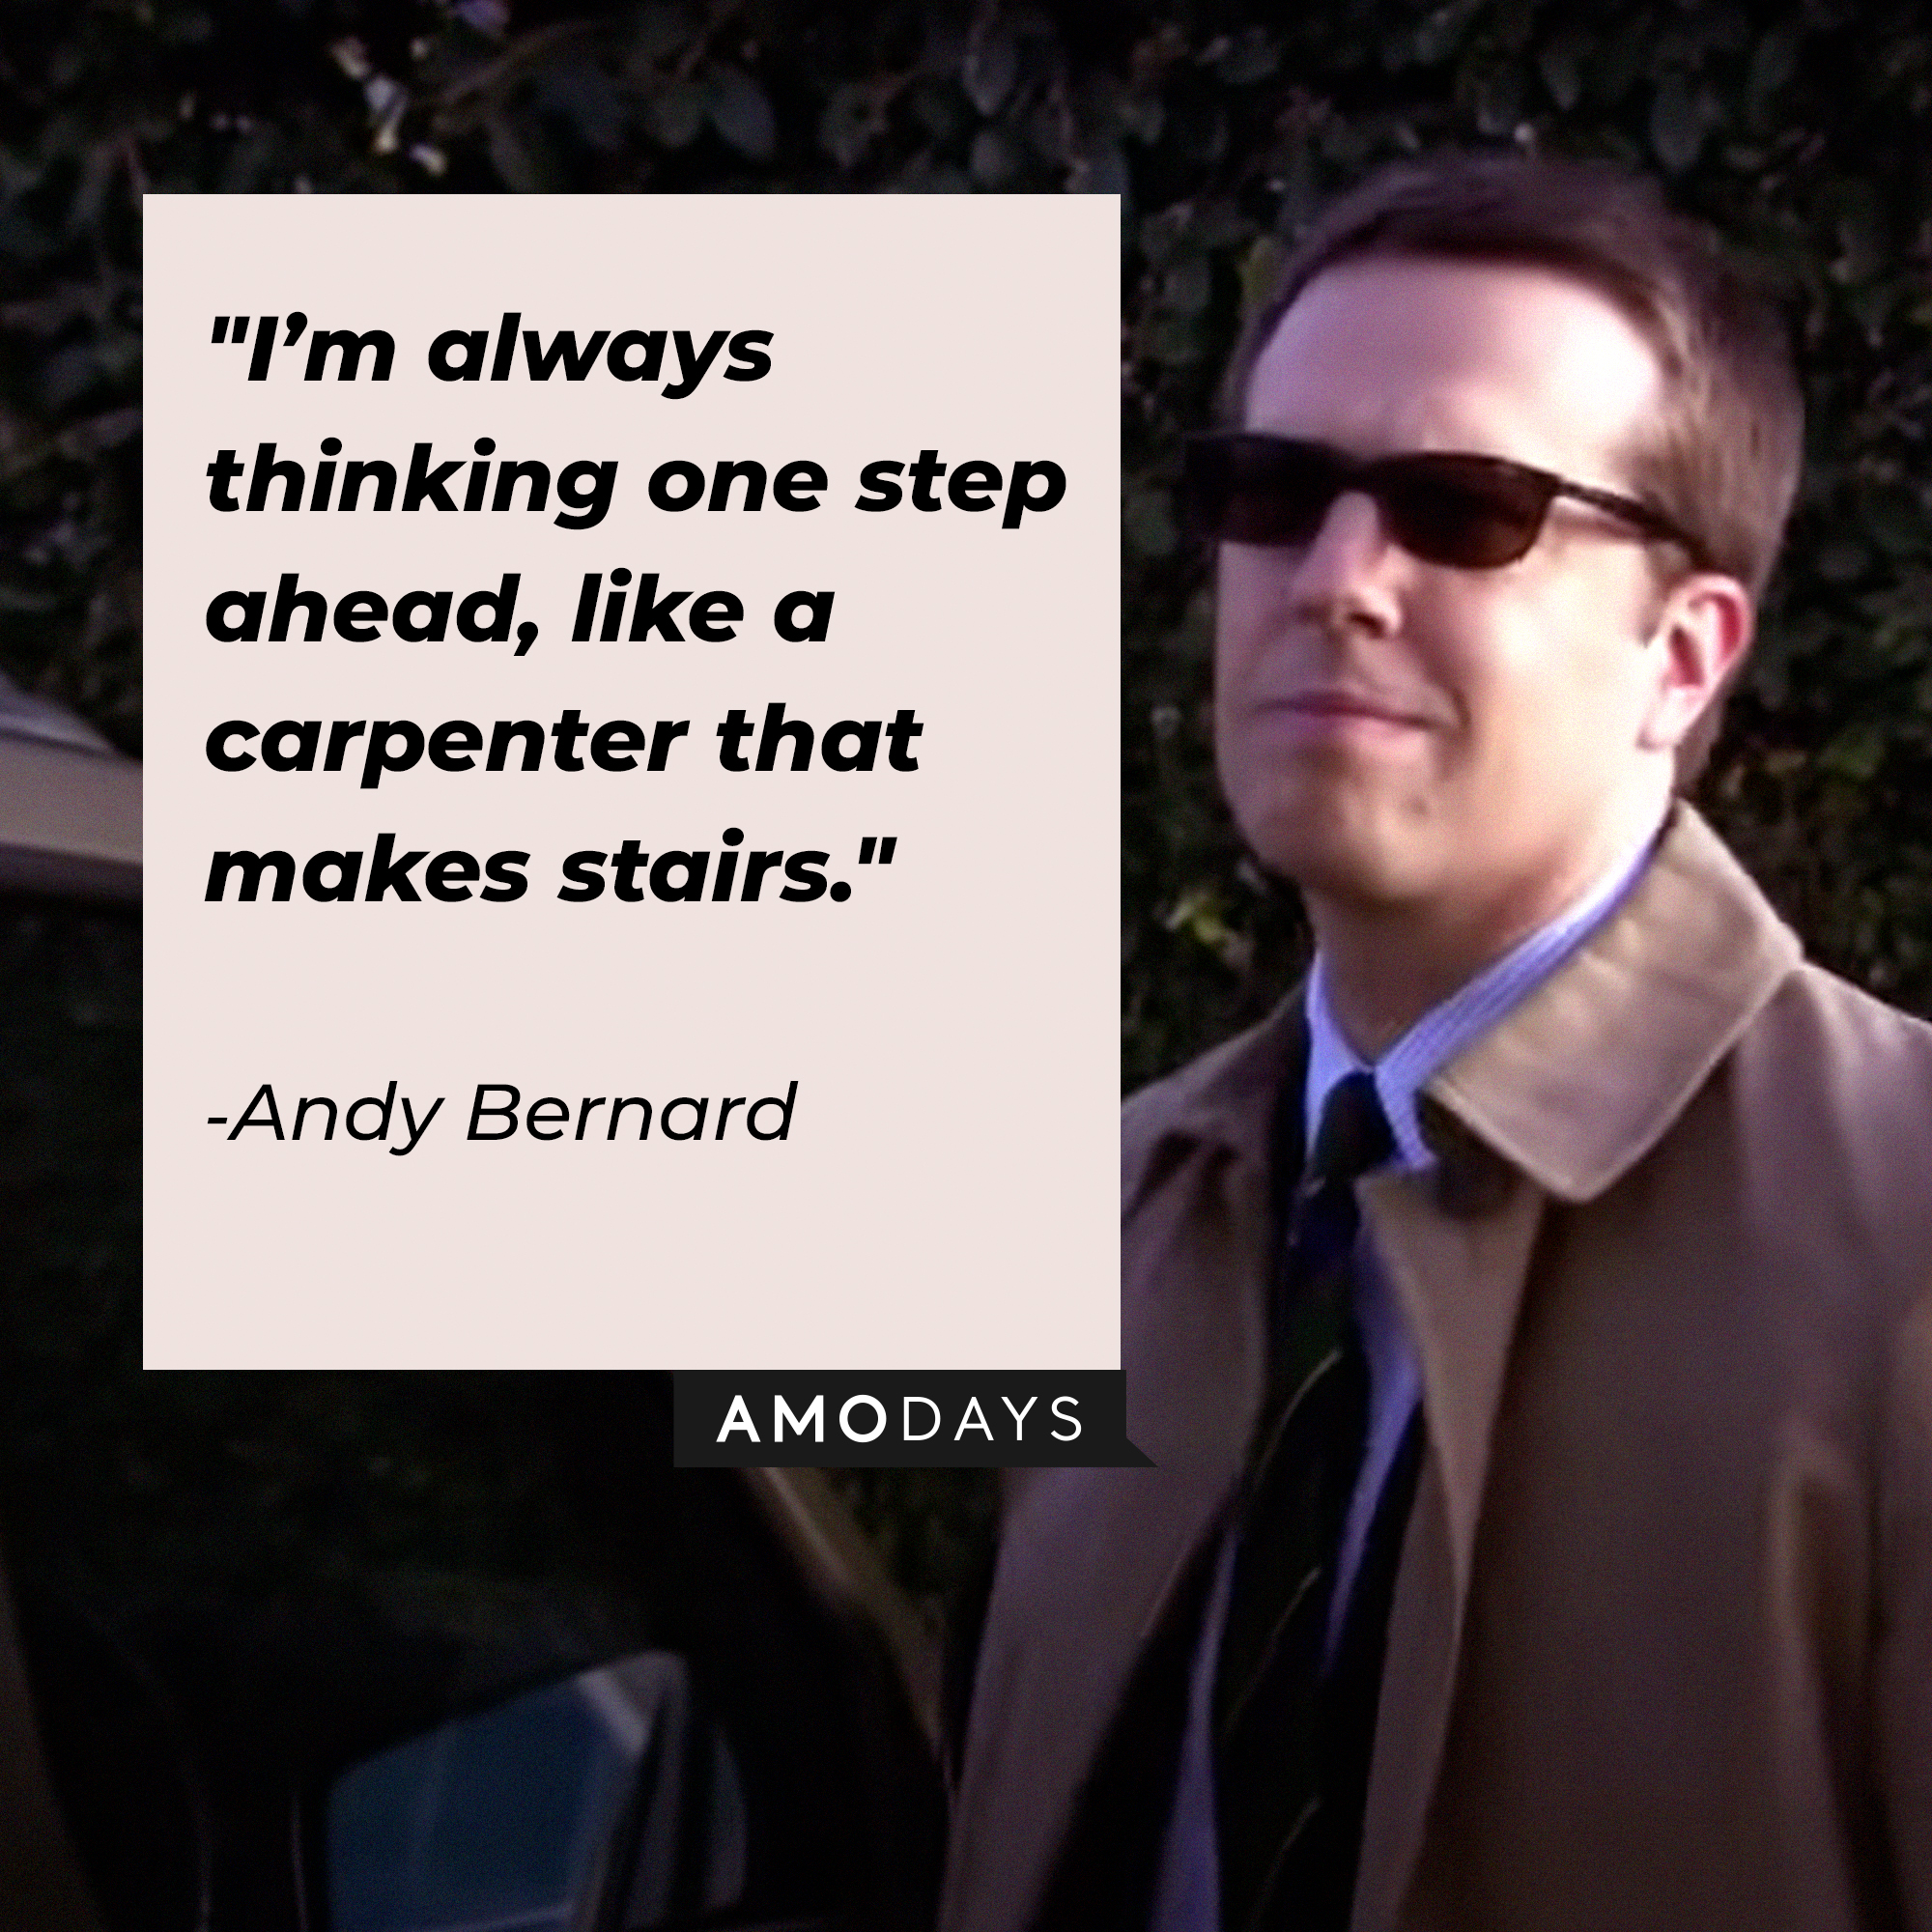 Andy Bernard, with his quote: “I’m always thinking one step ahead, like a carpenter that makes stairs.” │ Source: youtube.com/TheOffice